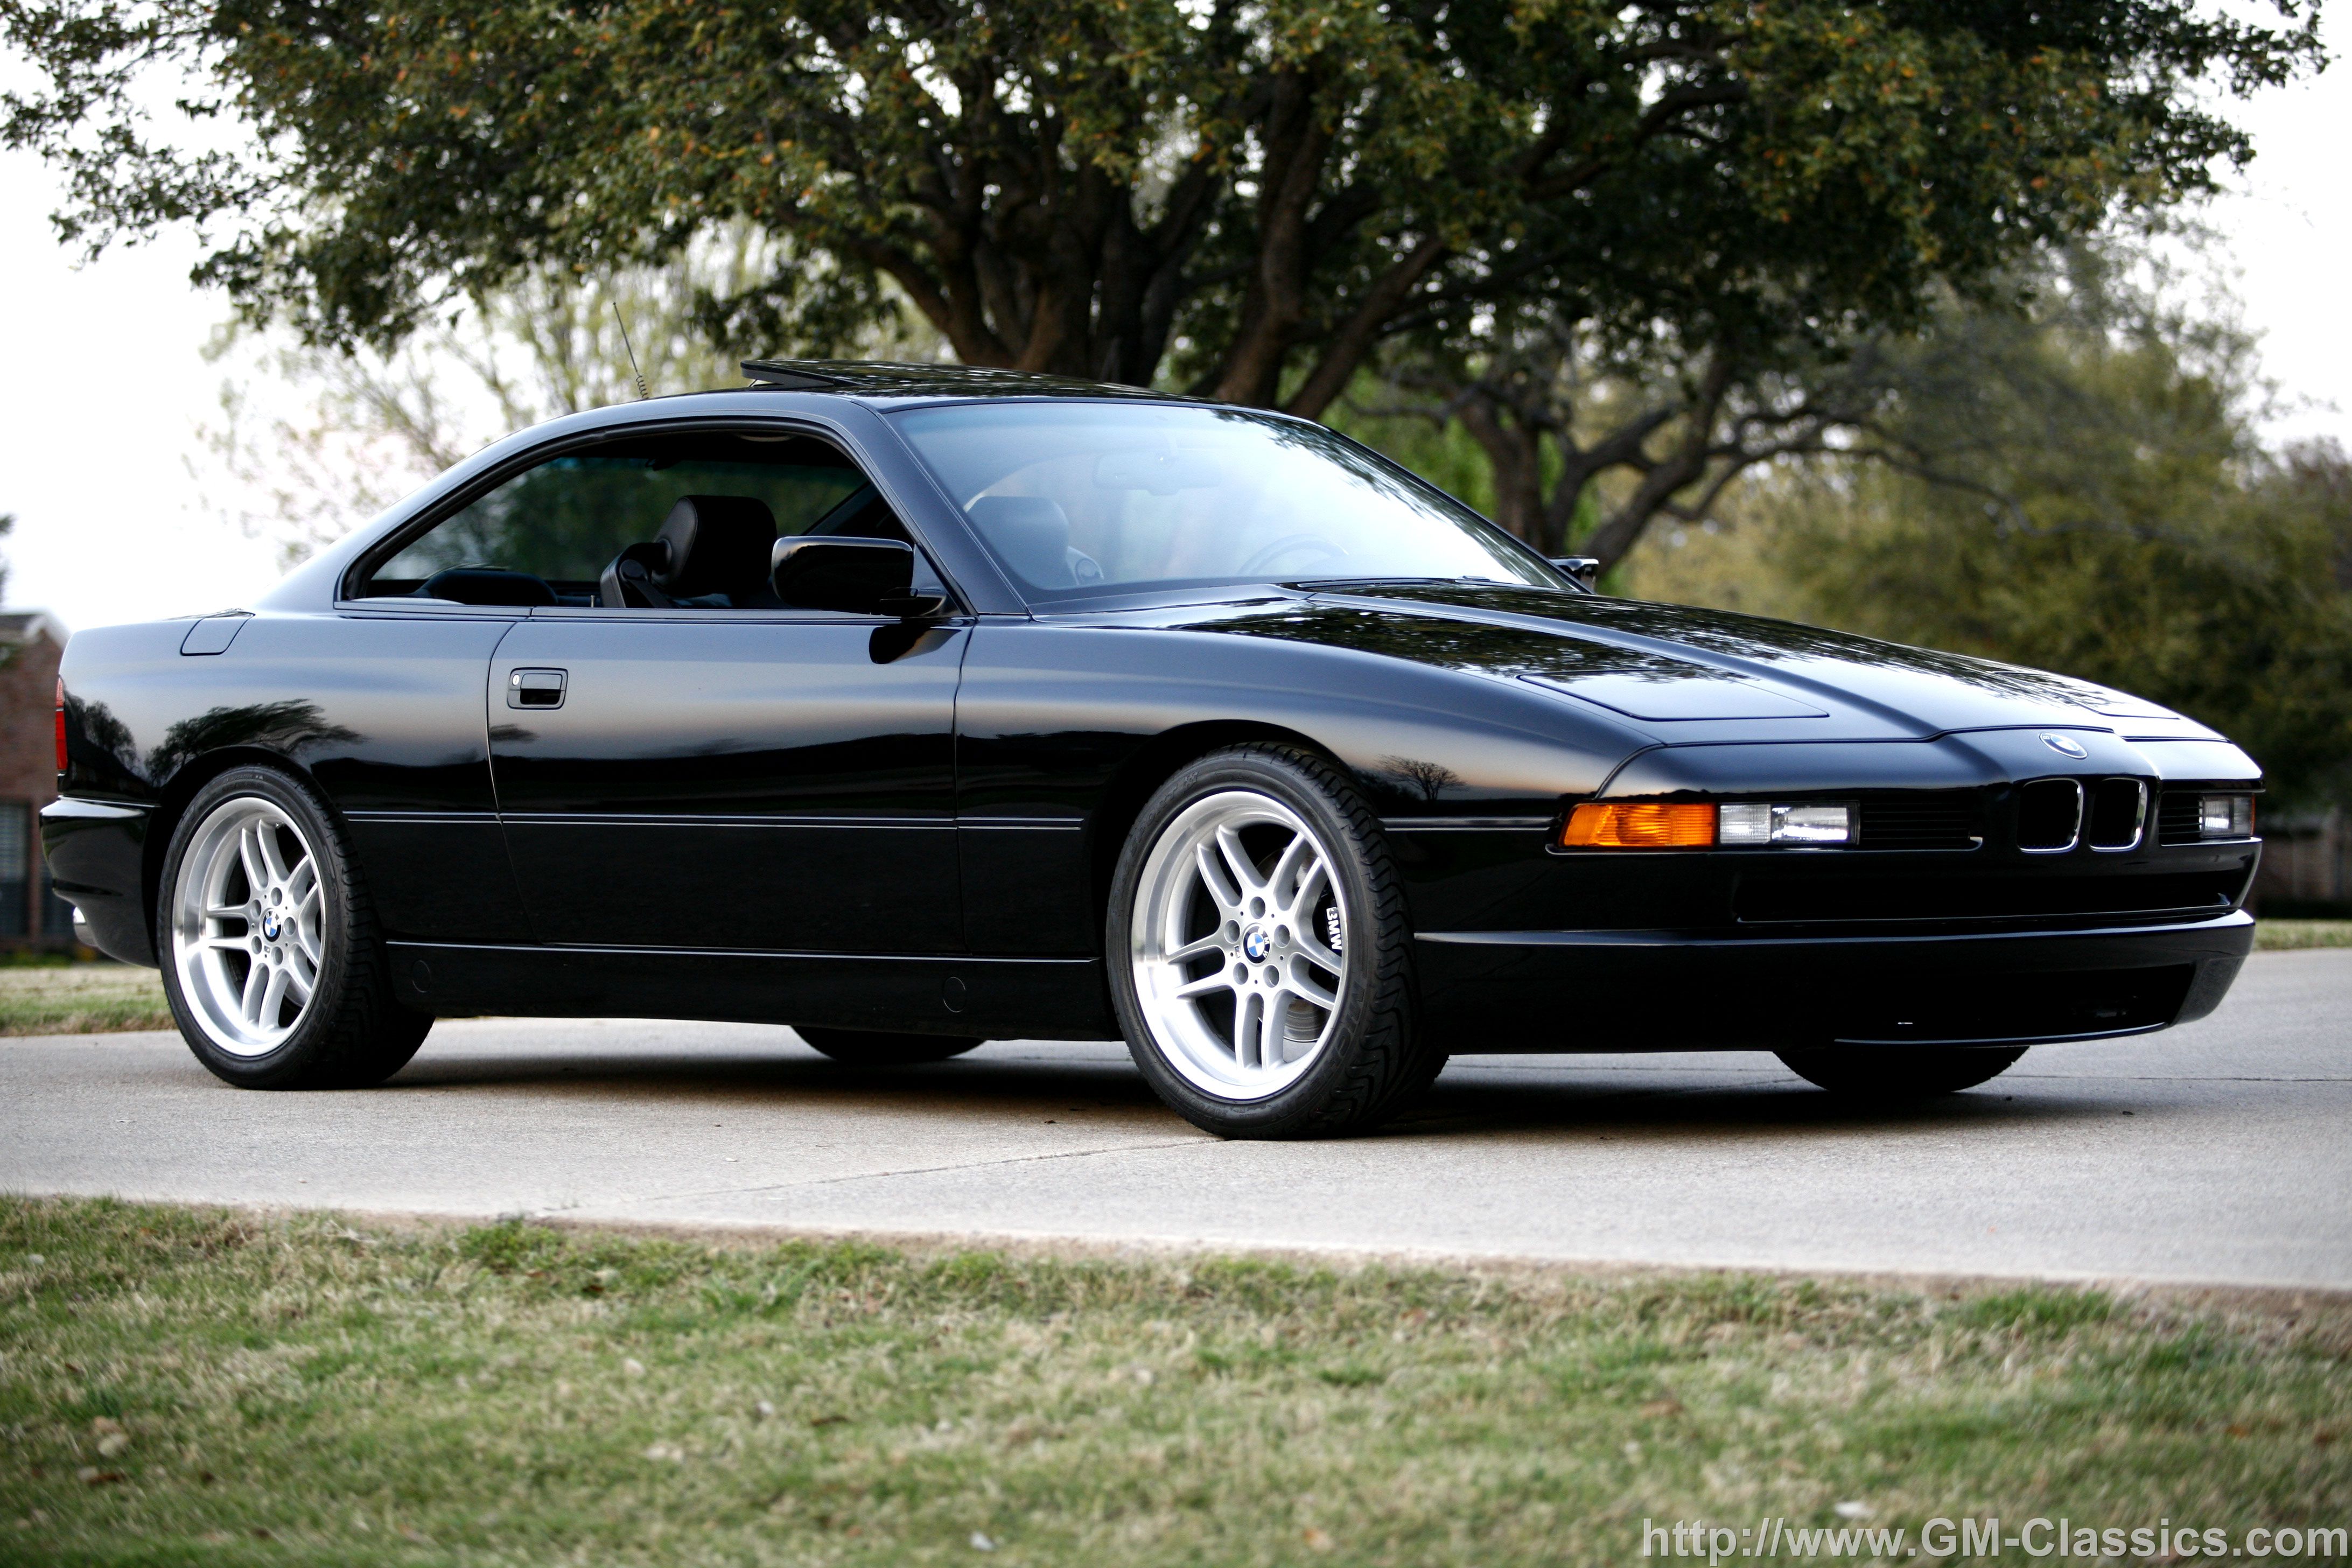   Sale on 1991 Bmw 850 V12 6 Speed Home Page